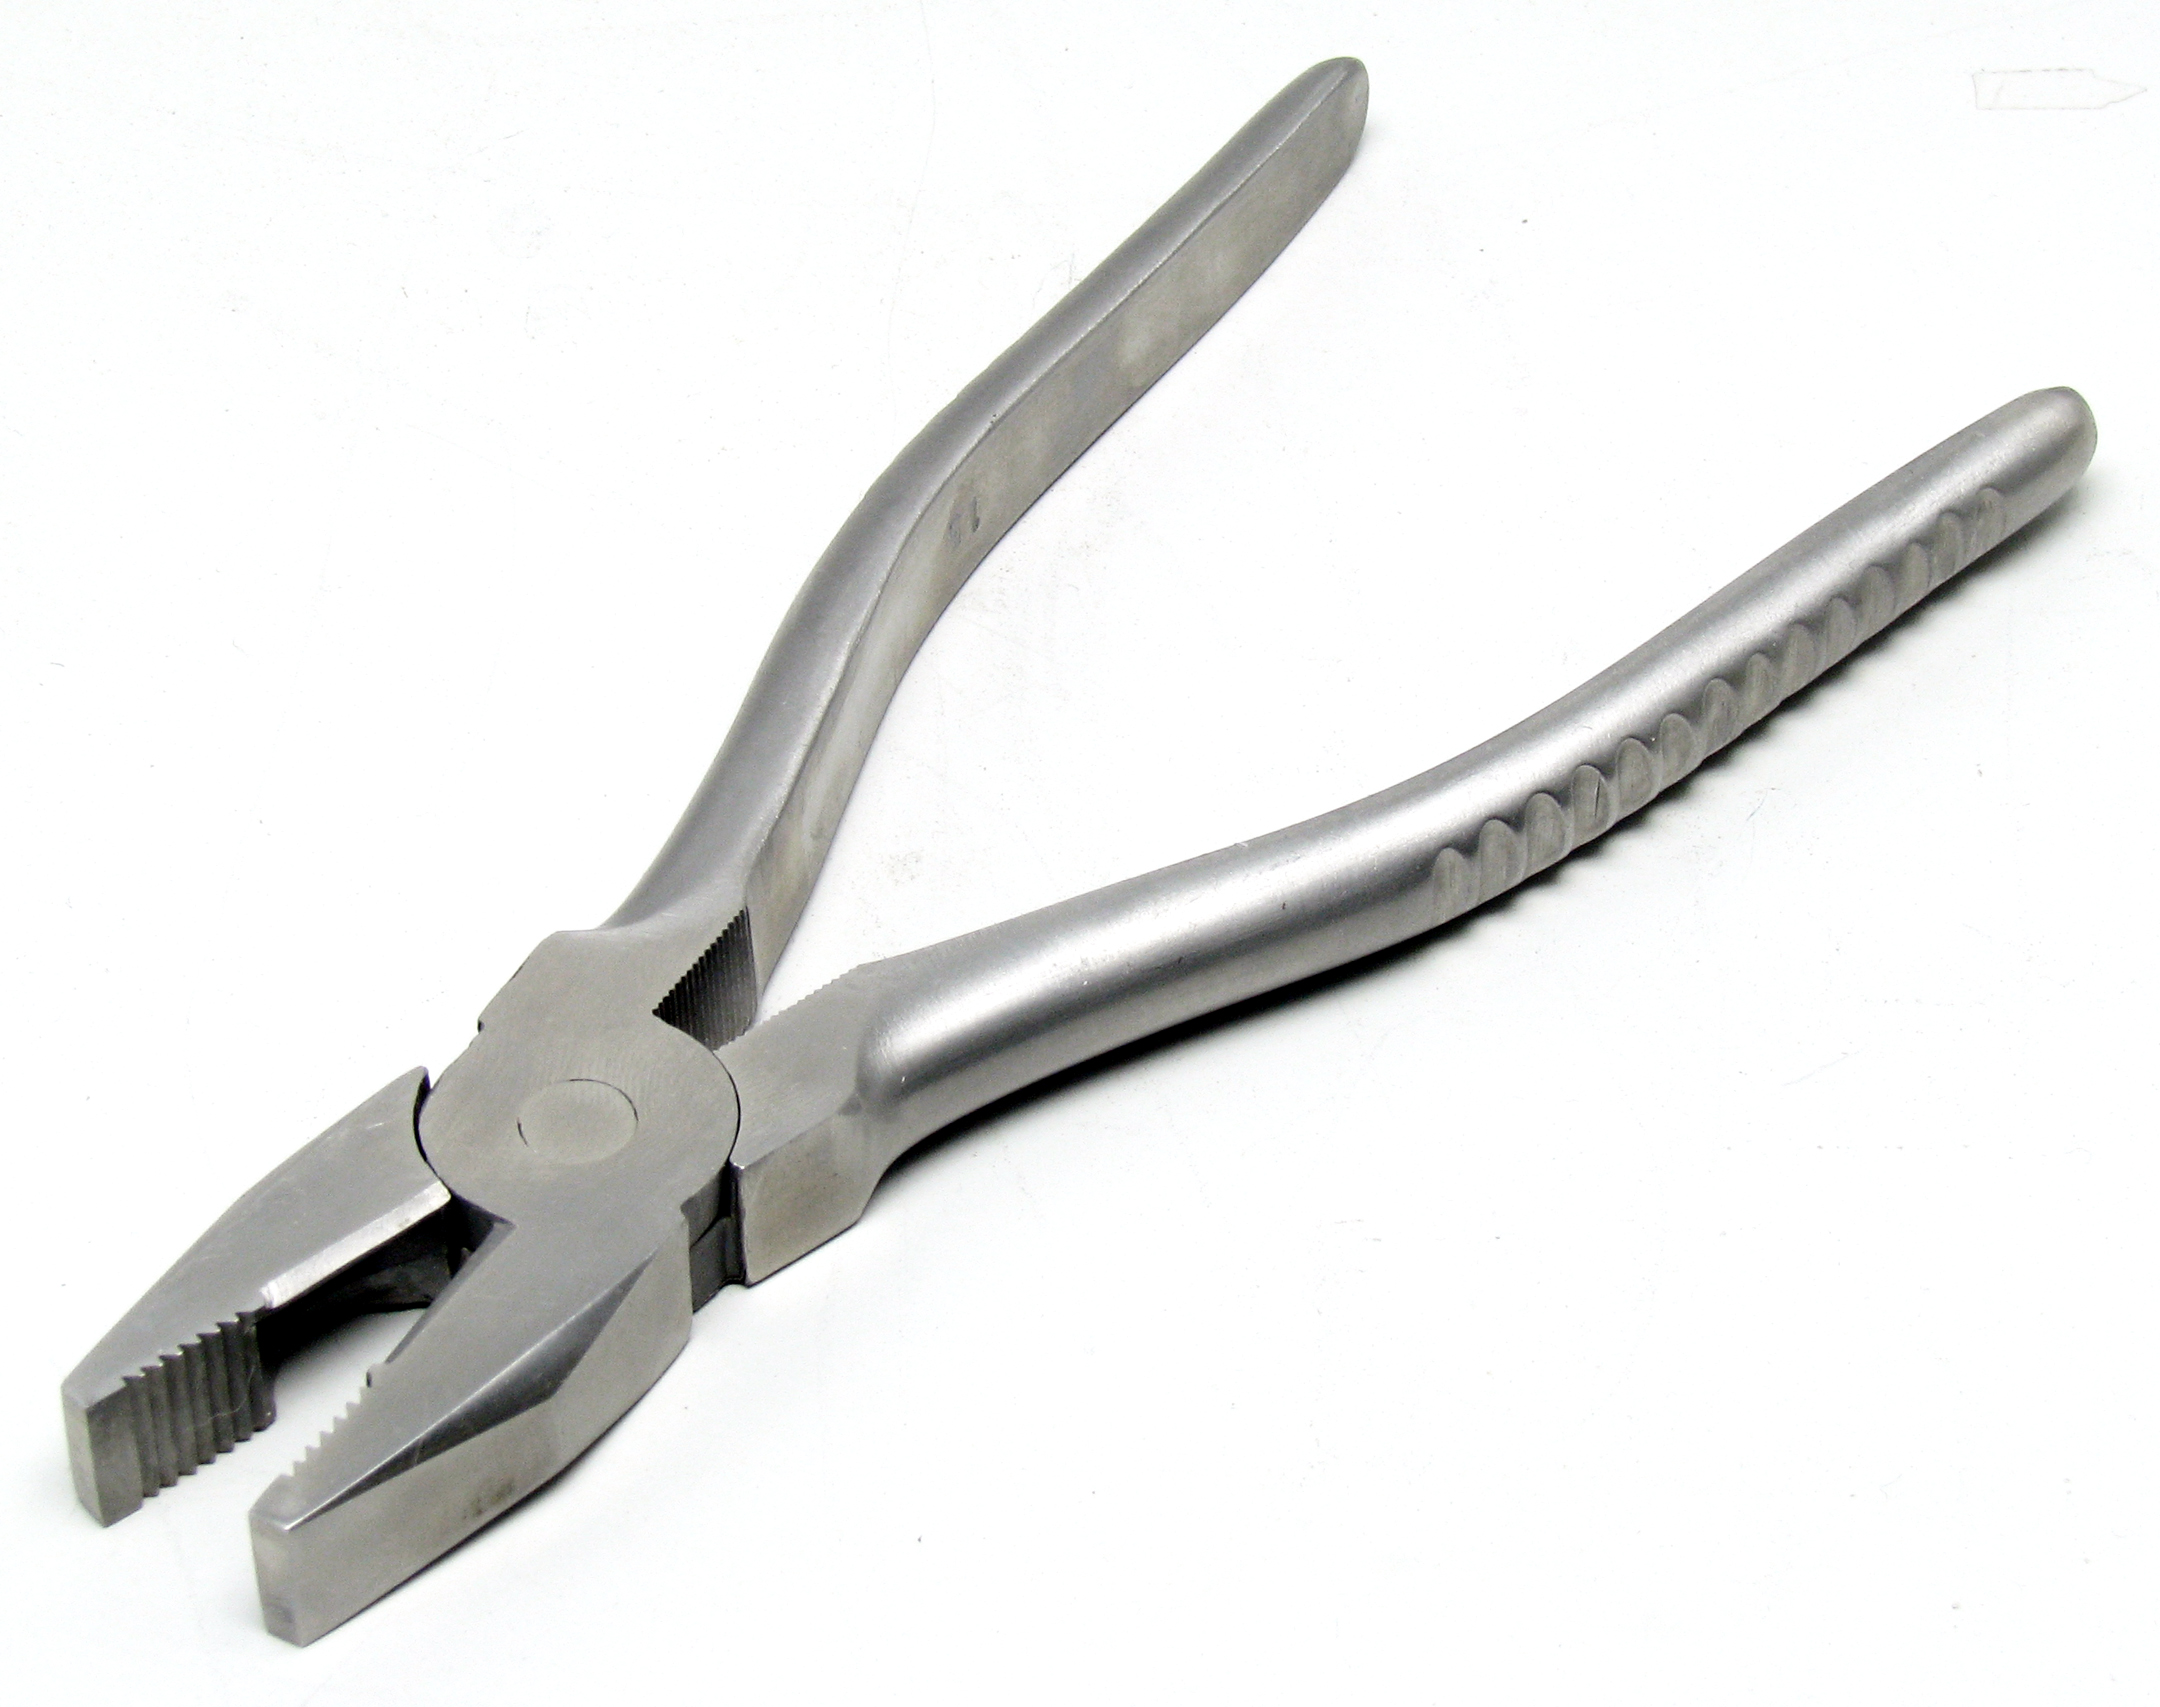 Stainless steel pliers photo